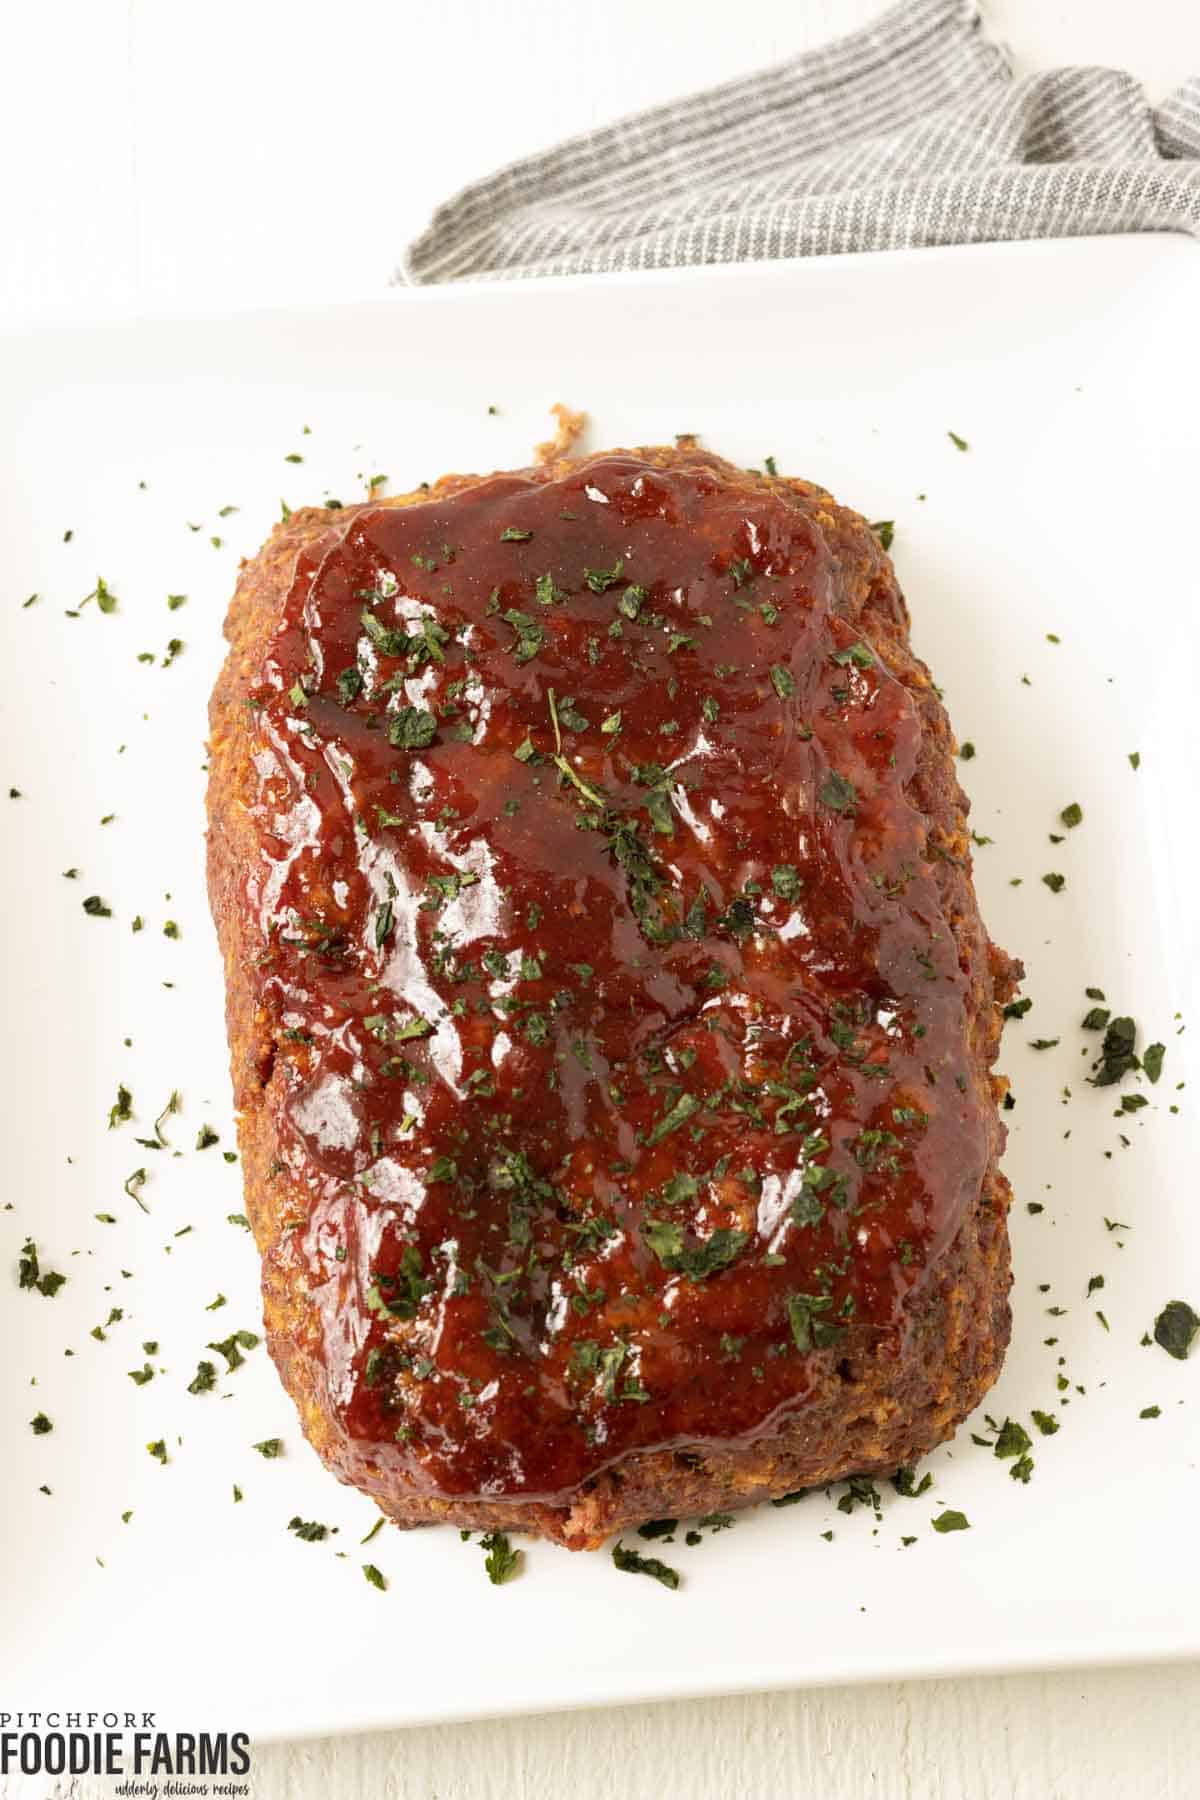 BBQ glazed meatloaf with fresh parsley sprinkled on top.